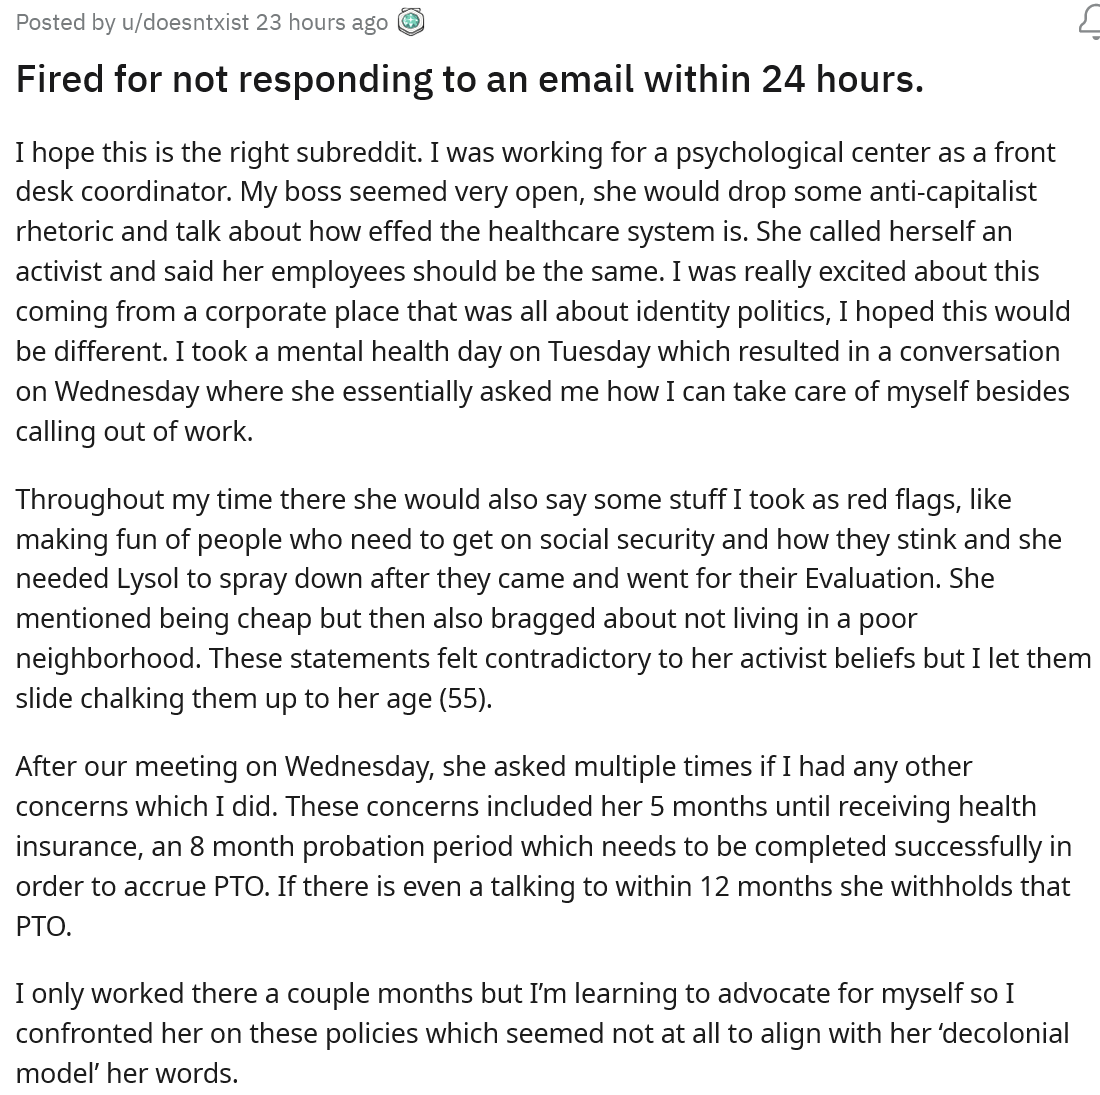 This employee worked for a company that had a boss with so many red flags. She got upset when they took a single day off for mental health and also made fun of people who worked for her and had to go on social services.
 <br><br>


The employee had a meeting with the boss about their mental health day and thought it went well until their boss sent an email that was the total opposite of how their meeting went and actually said they were disappointed that they didn't come to work. Since the employee didn't respond within 24 hours, the boss decided the best thing to do was fire them.
 <br><br>


They went to r/antiwork to get some perspective and some legal advice on how to move forward, to which most people responded by saying that this was a total violation and their boss deserved to be sued. 